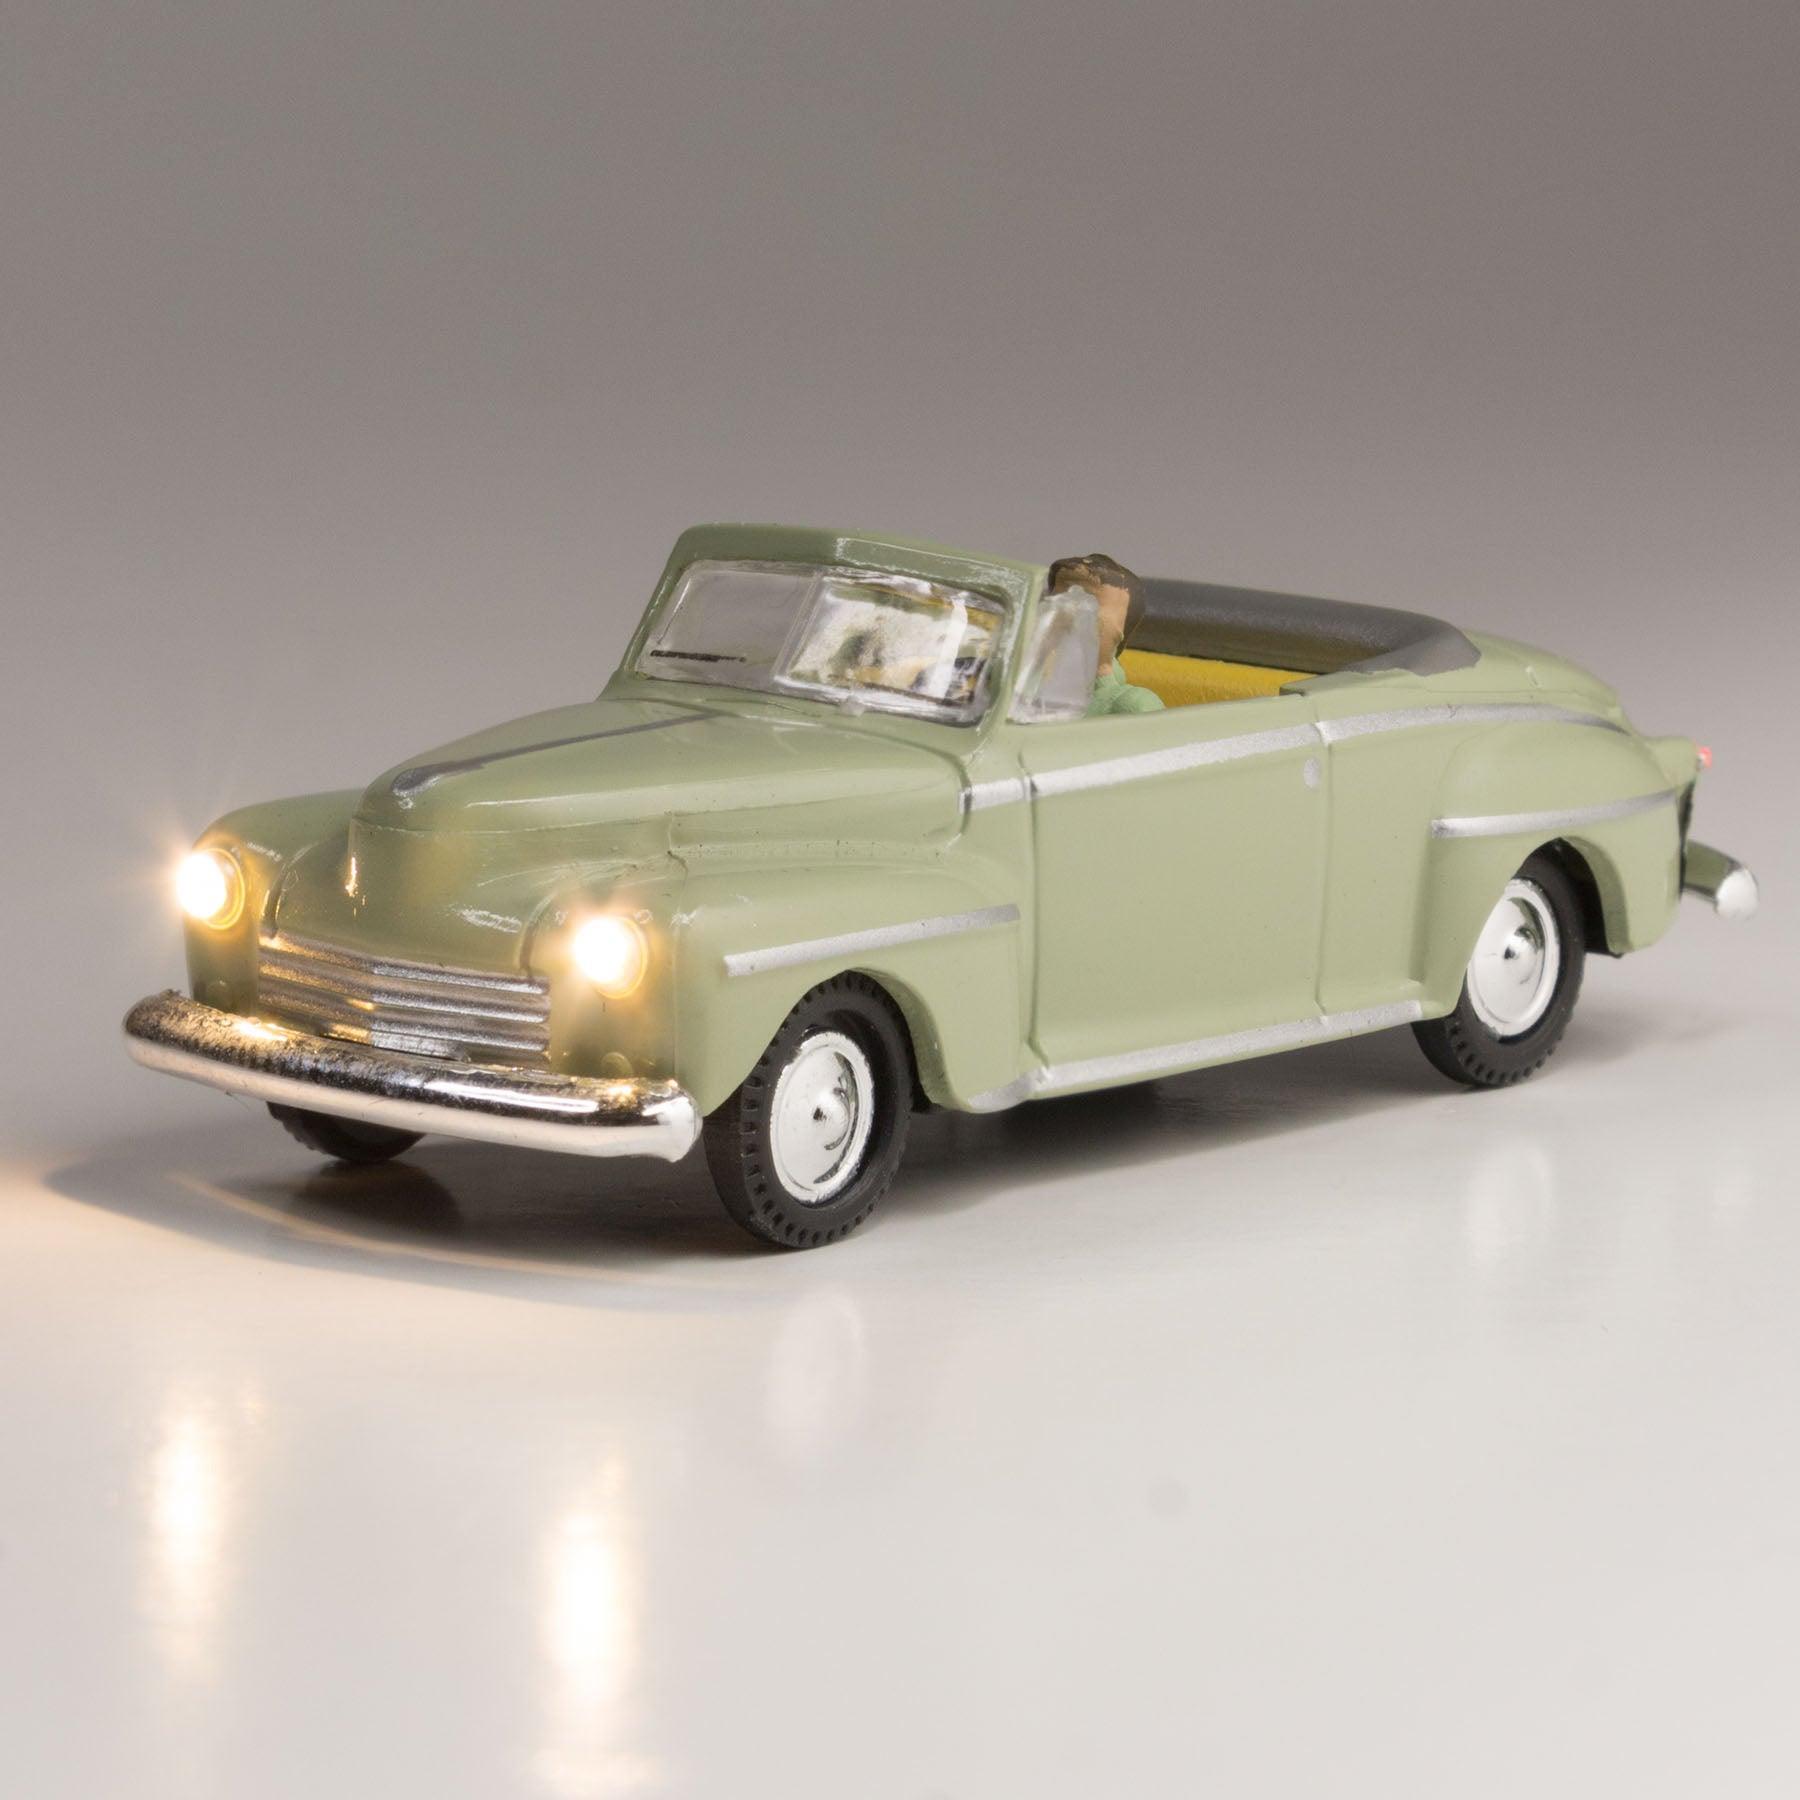 Woodland Scenics 5594 | Just Plug® Vehicles - Cool Convertible | HO Scale